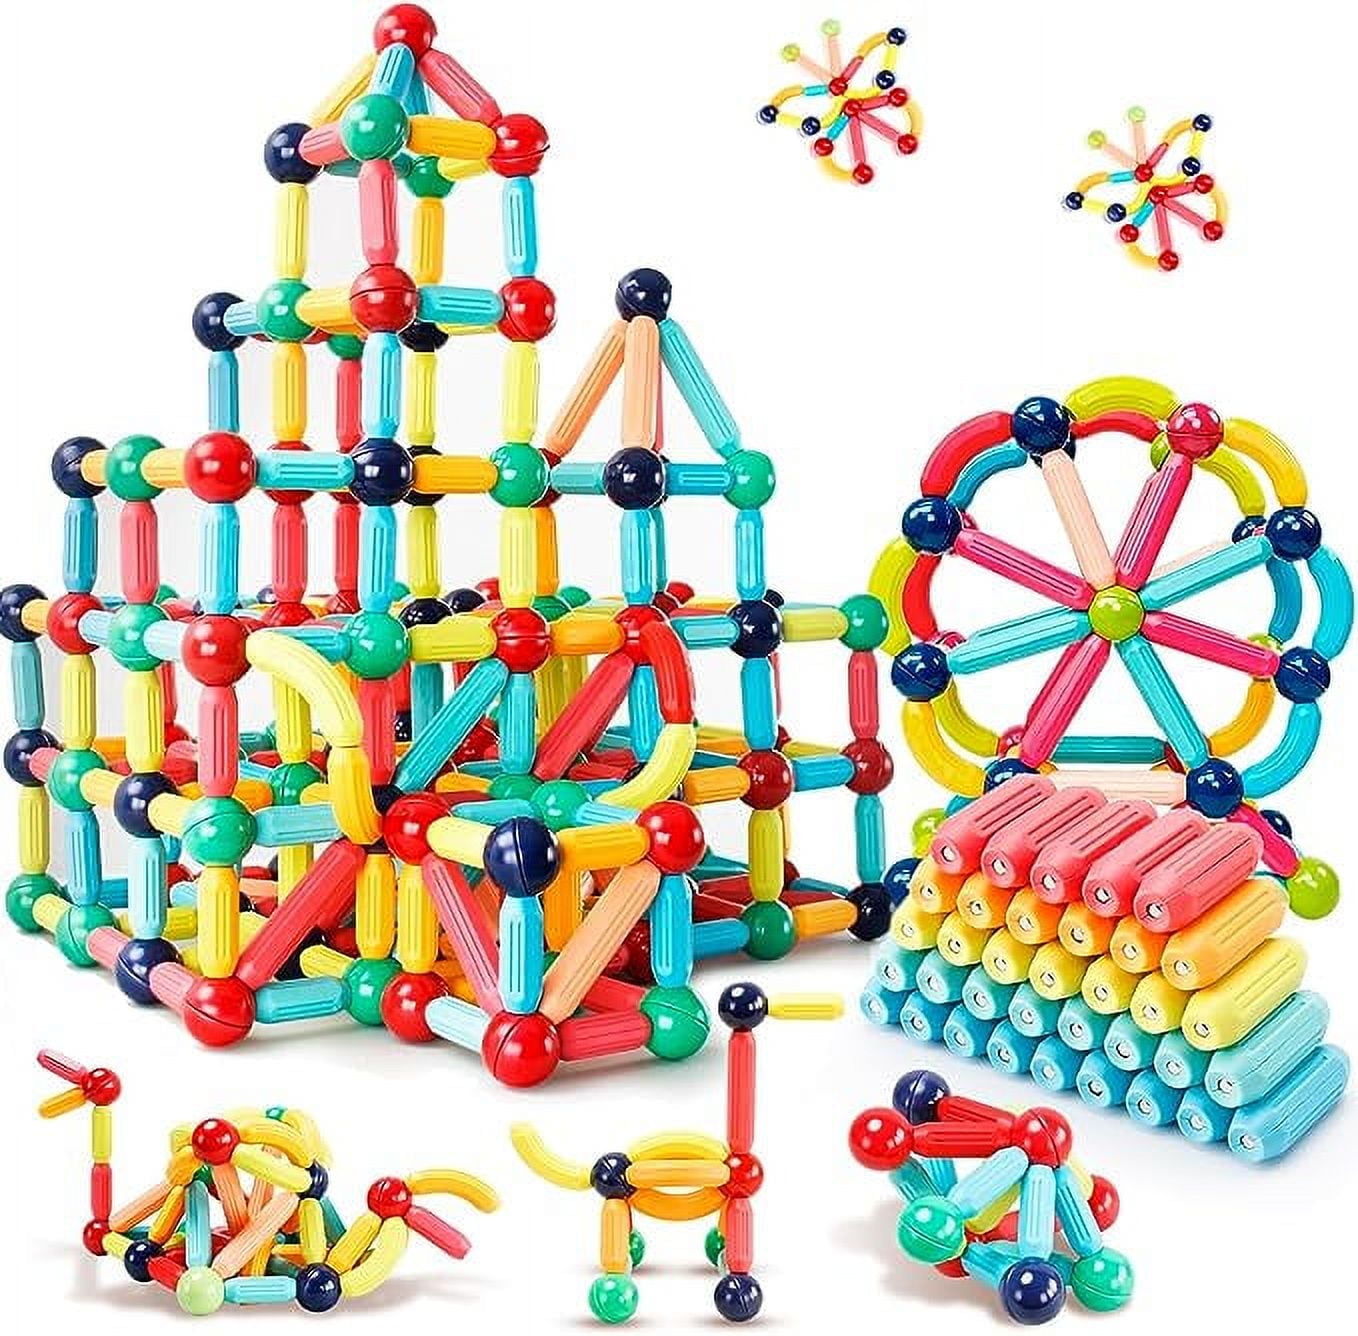 Generic Toys For Autistic Children Age 5-7 Colorful Challenge Shape Blocks  @ Best Price Online